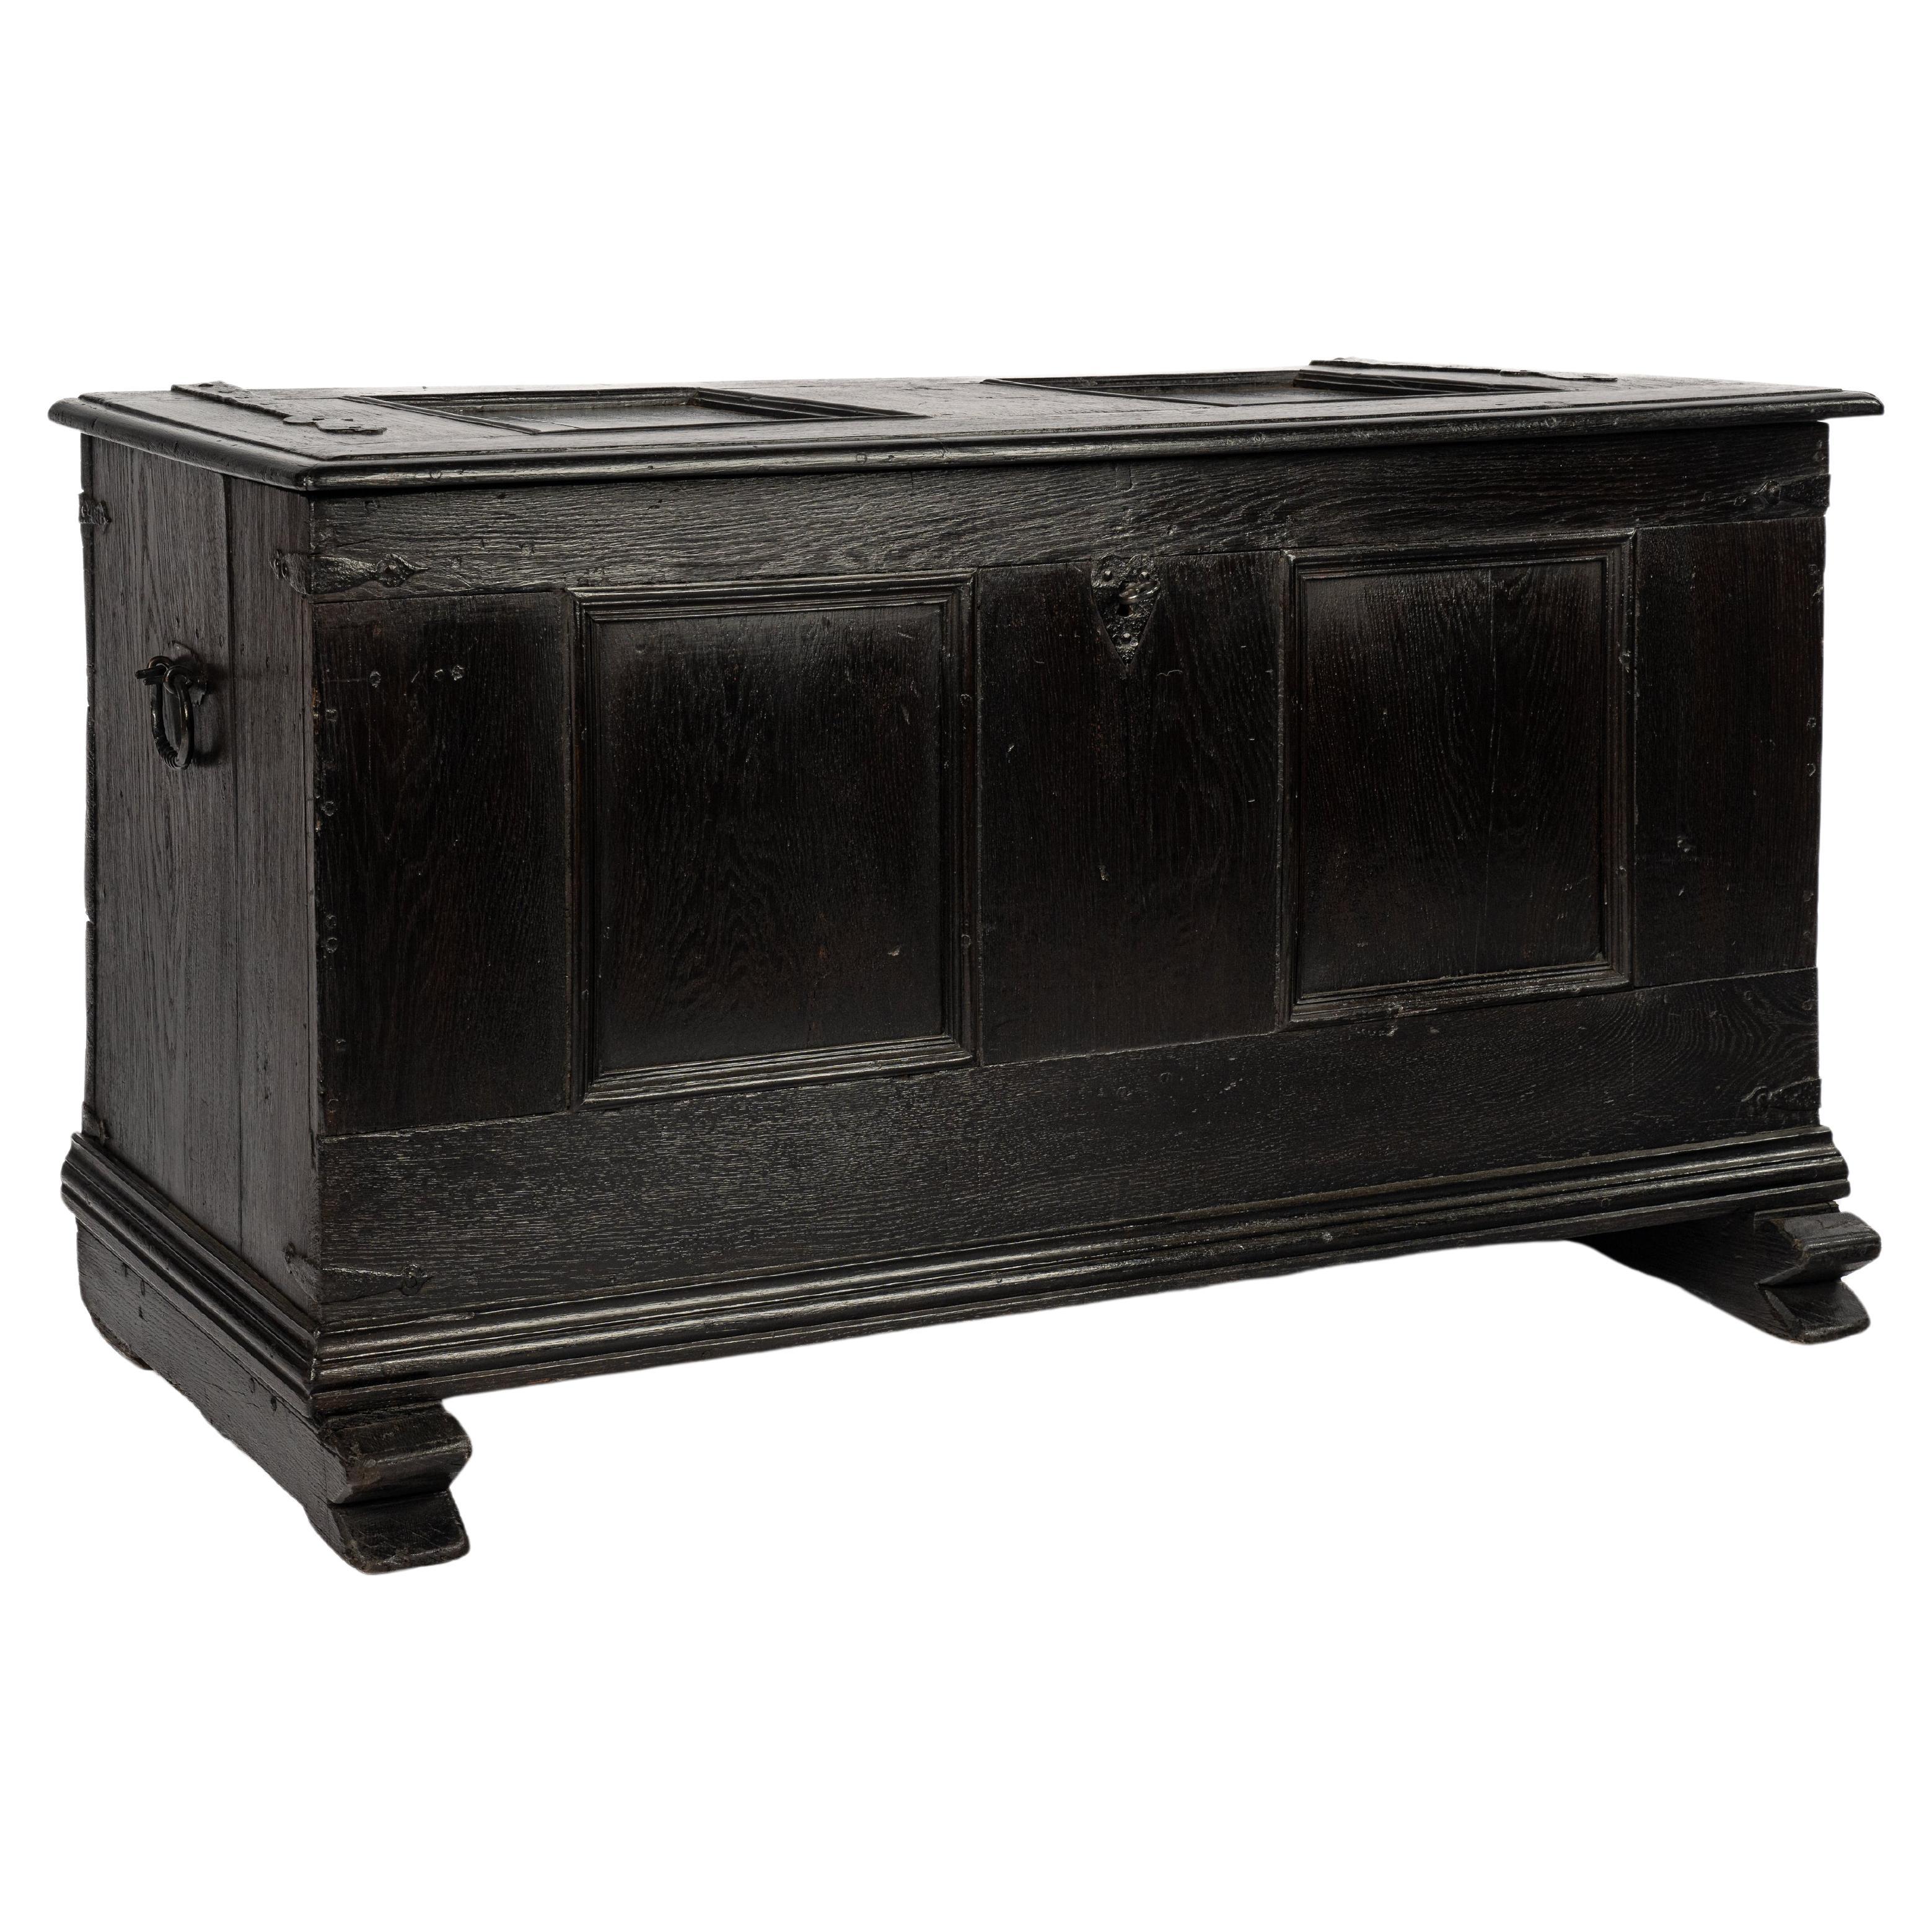  Antique late 18th century German Solid black Oak panelled trunk or coffer